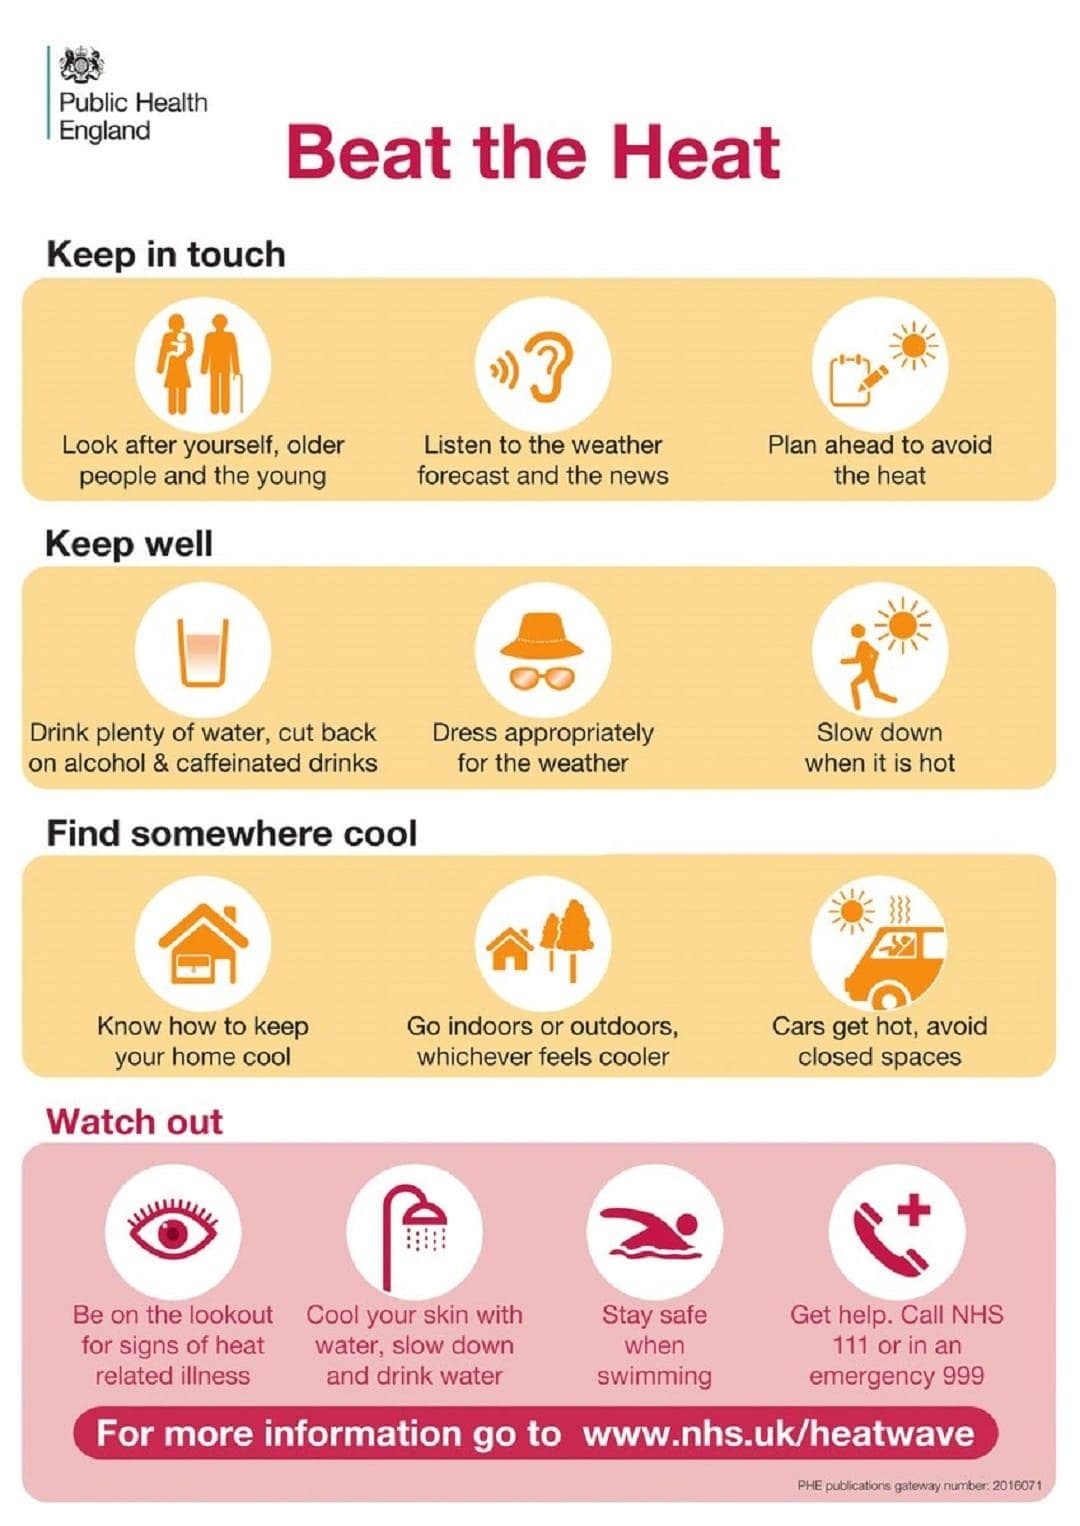 Beat the heat information from Public Health England